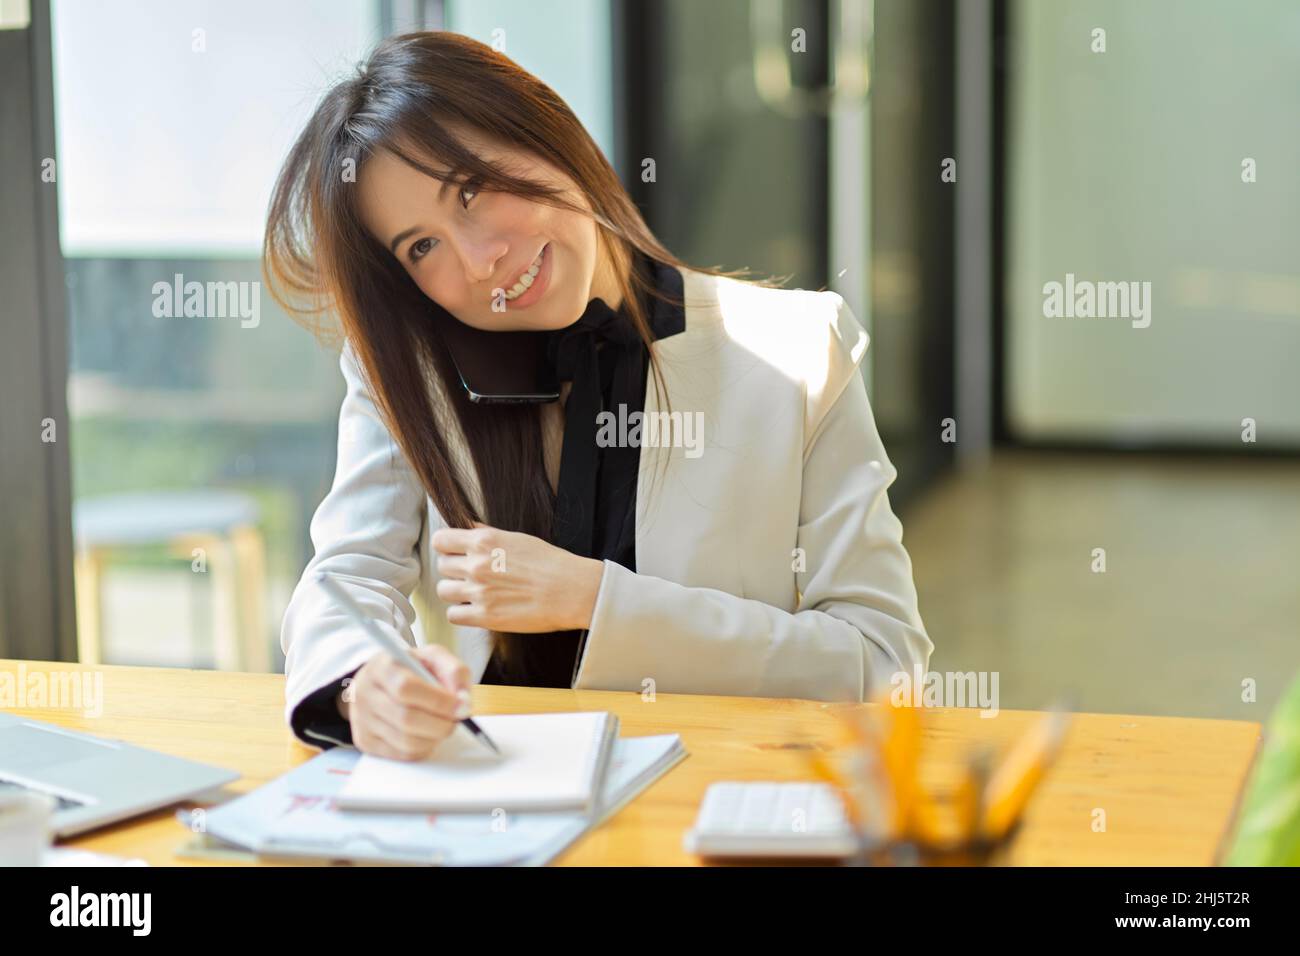 Attractive female assistant or secretary answering phone call and taking notes on her notepad at her office desk. Woman talking on the phone. Stock Photo